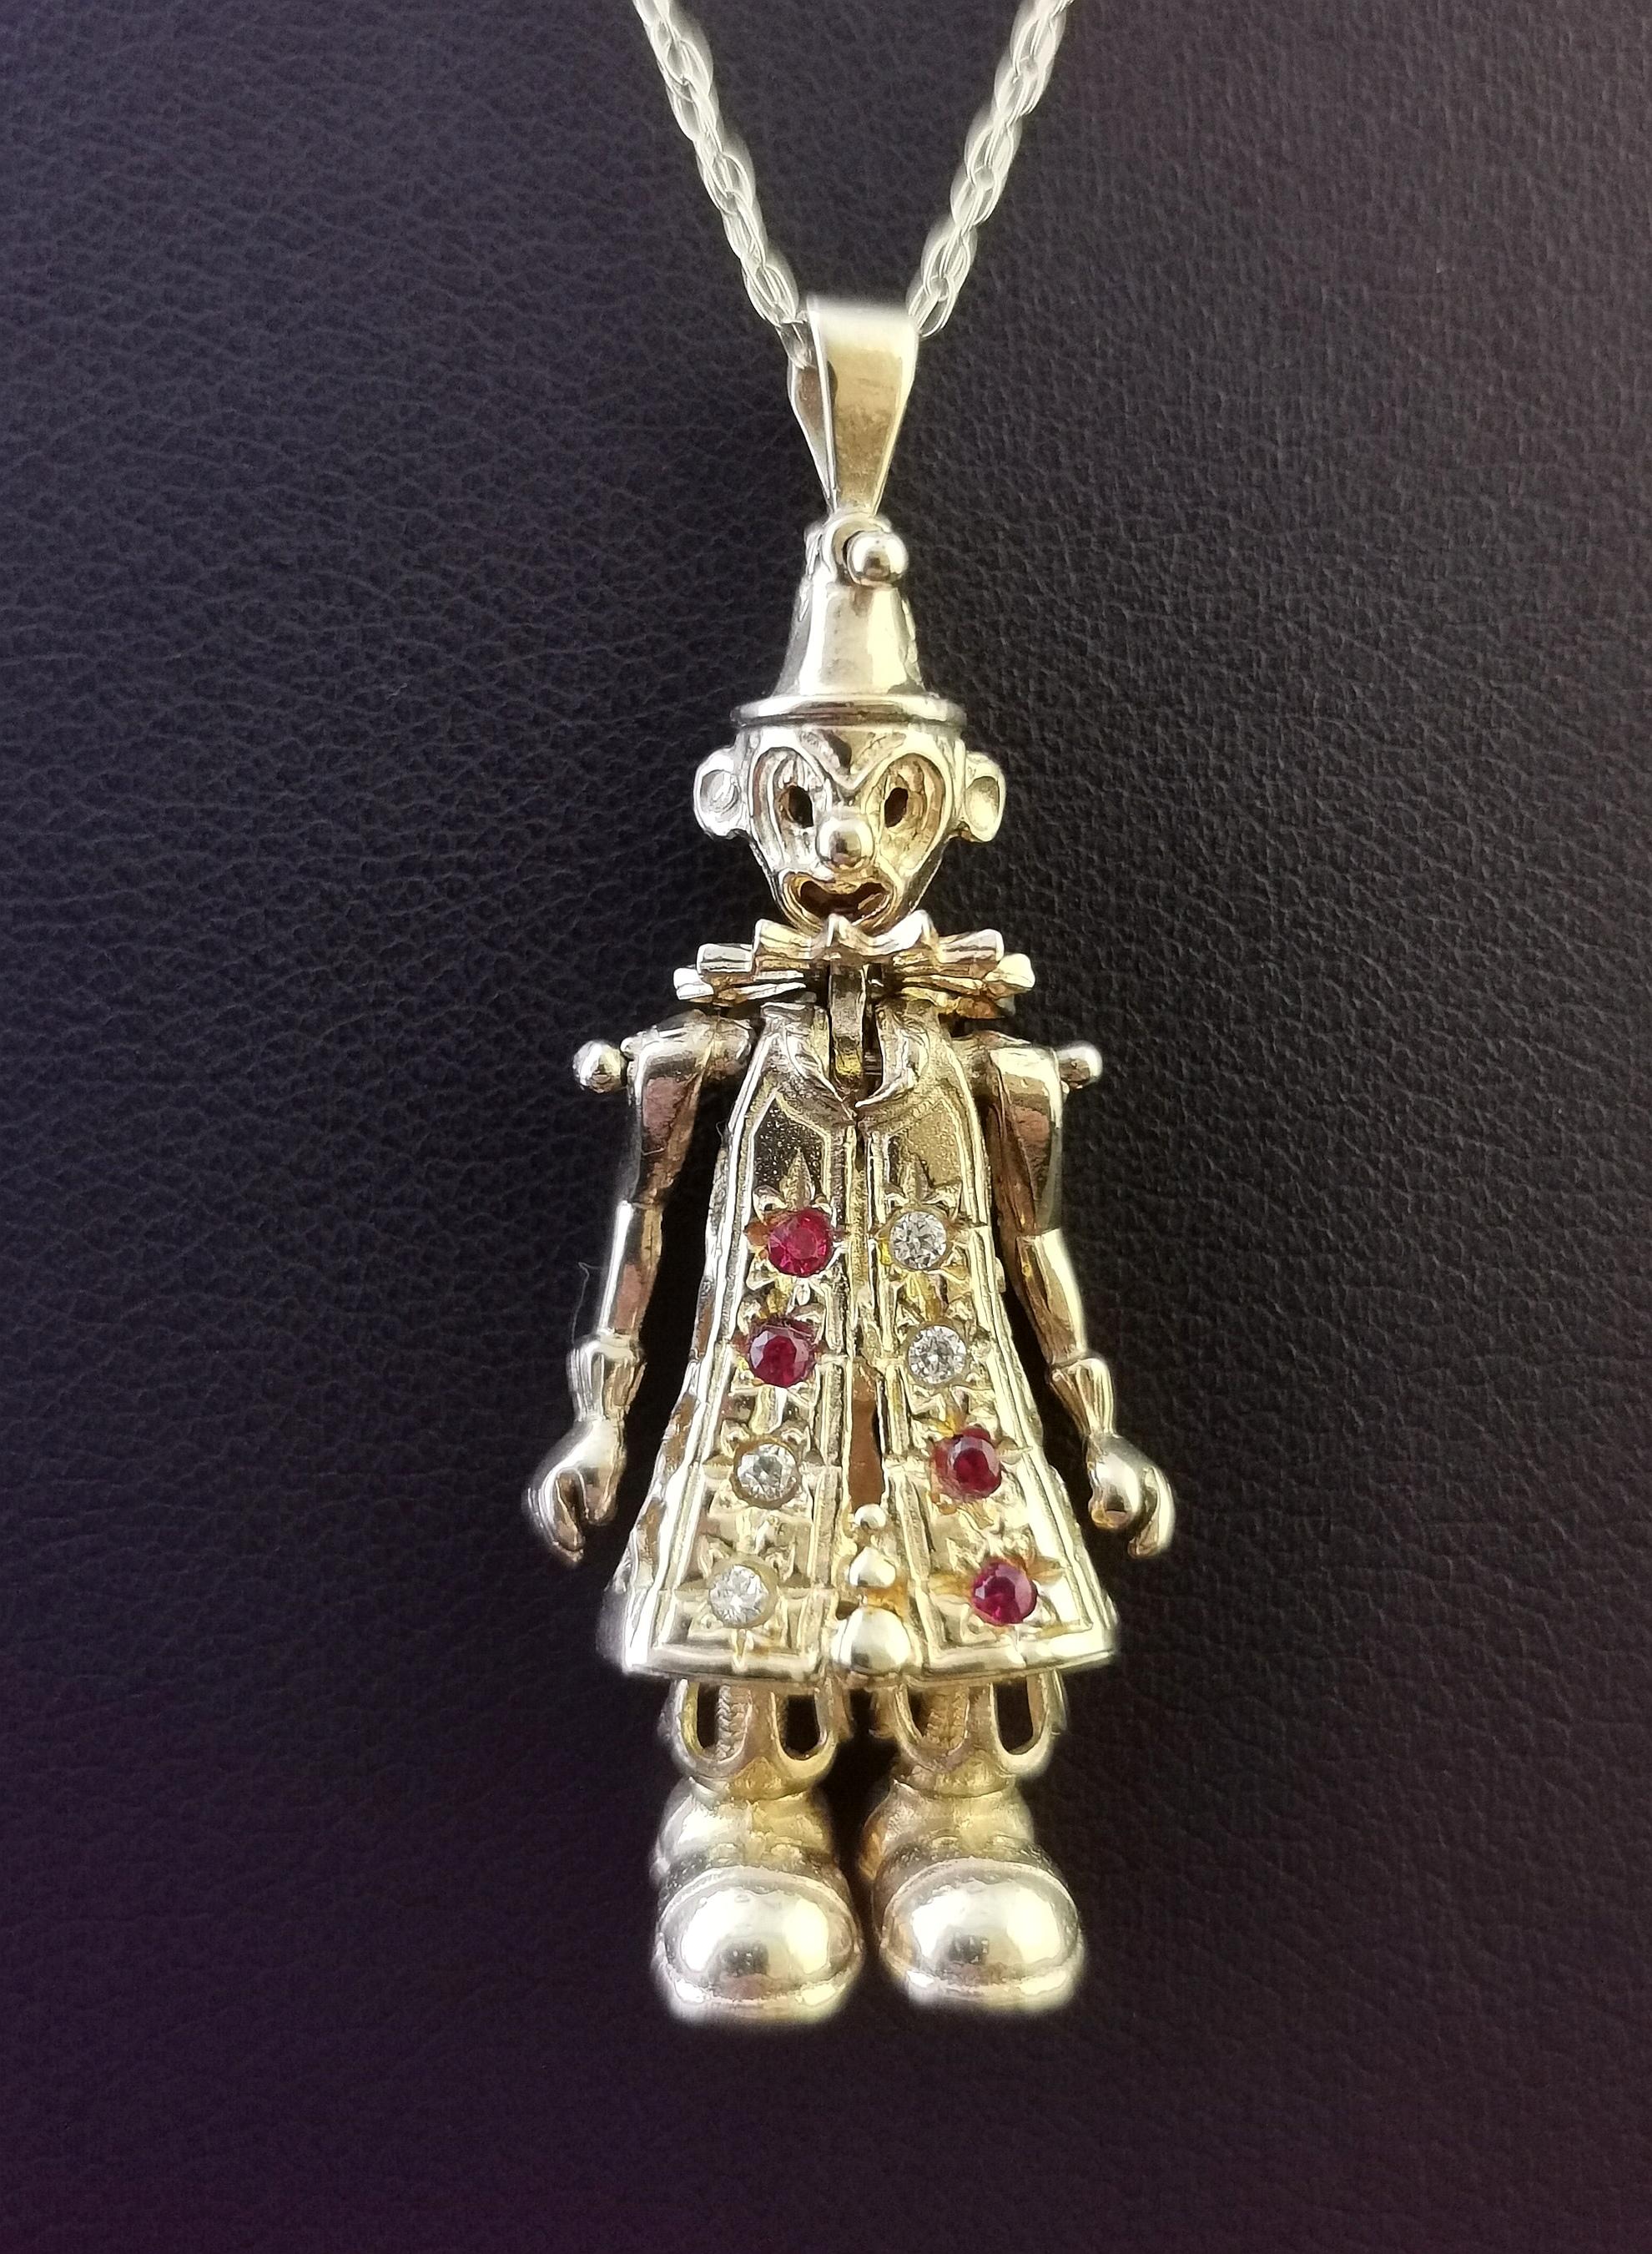 Vintage 9 Karat Yellow Gold Clown Pendant, Trace Link Necklace, Articulated 7